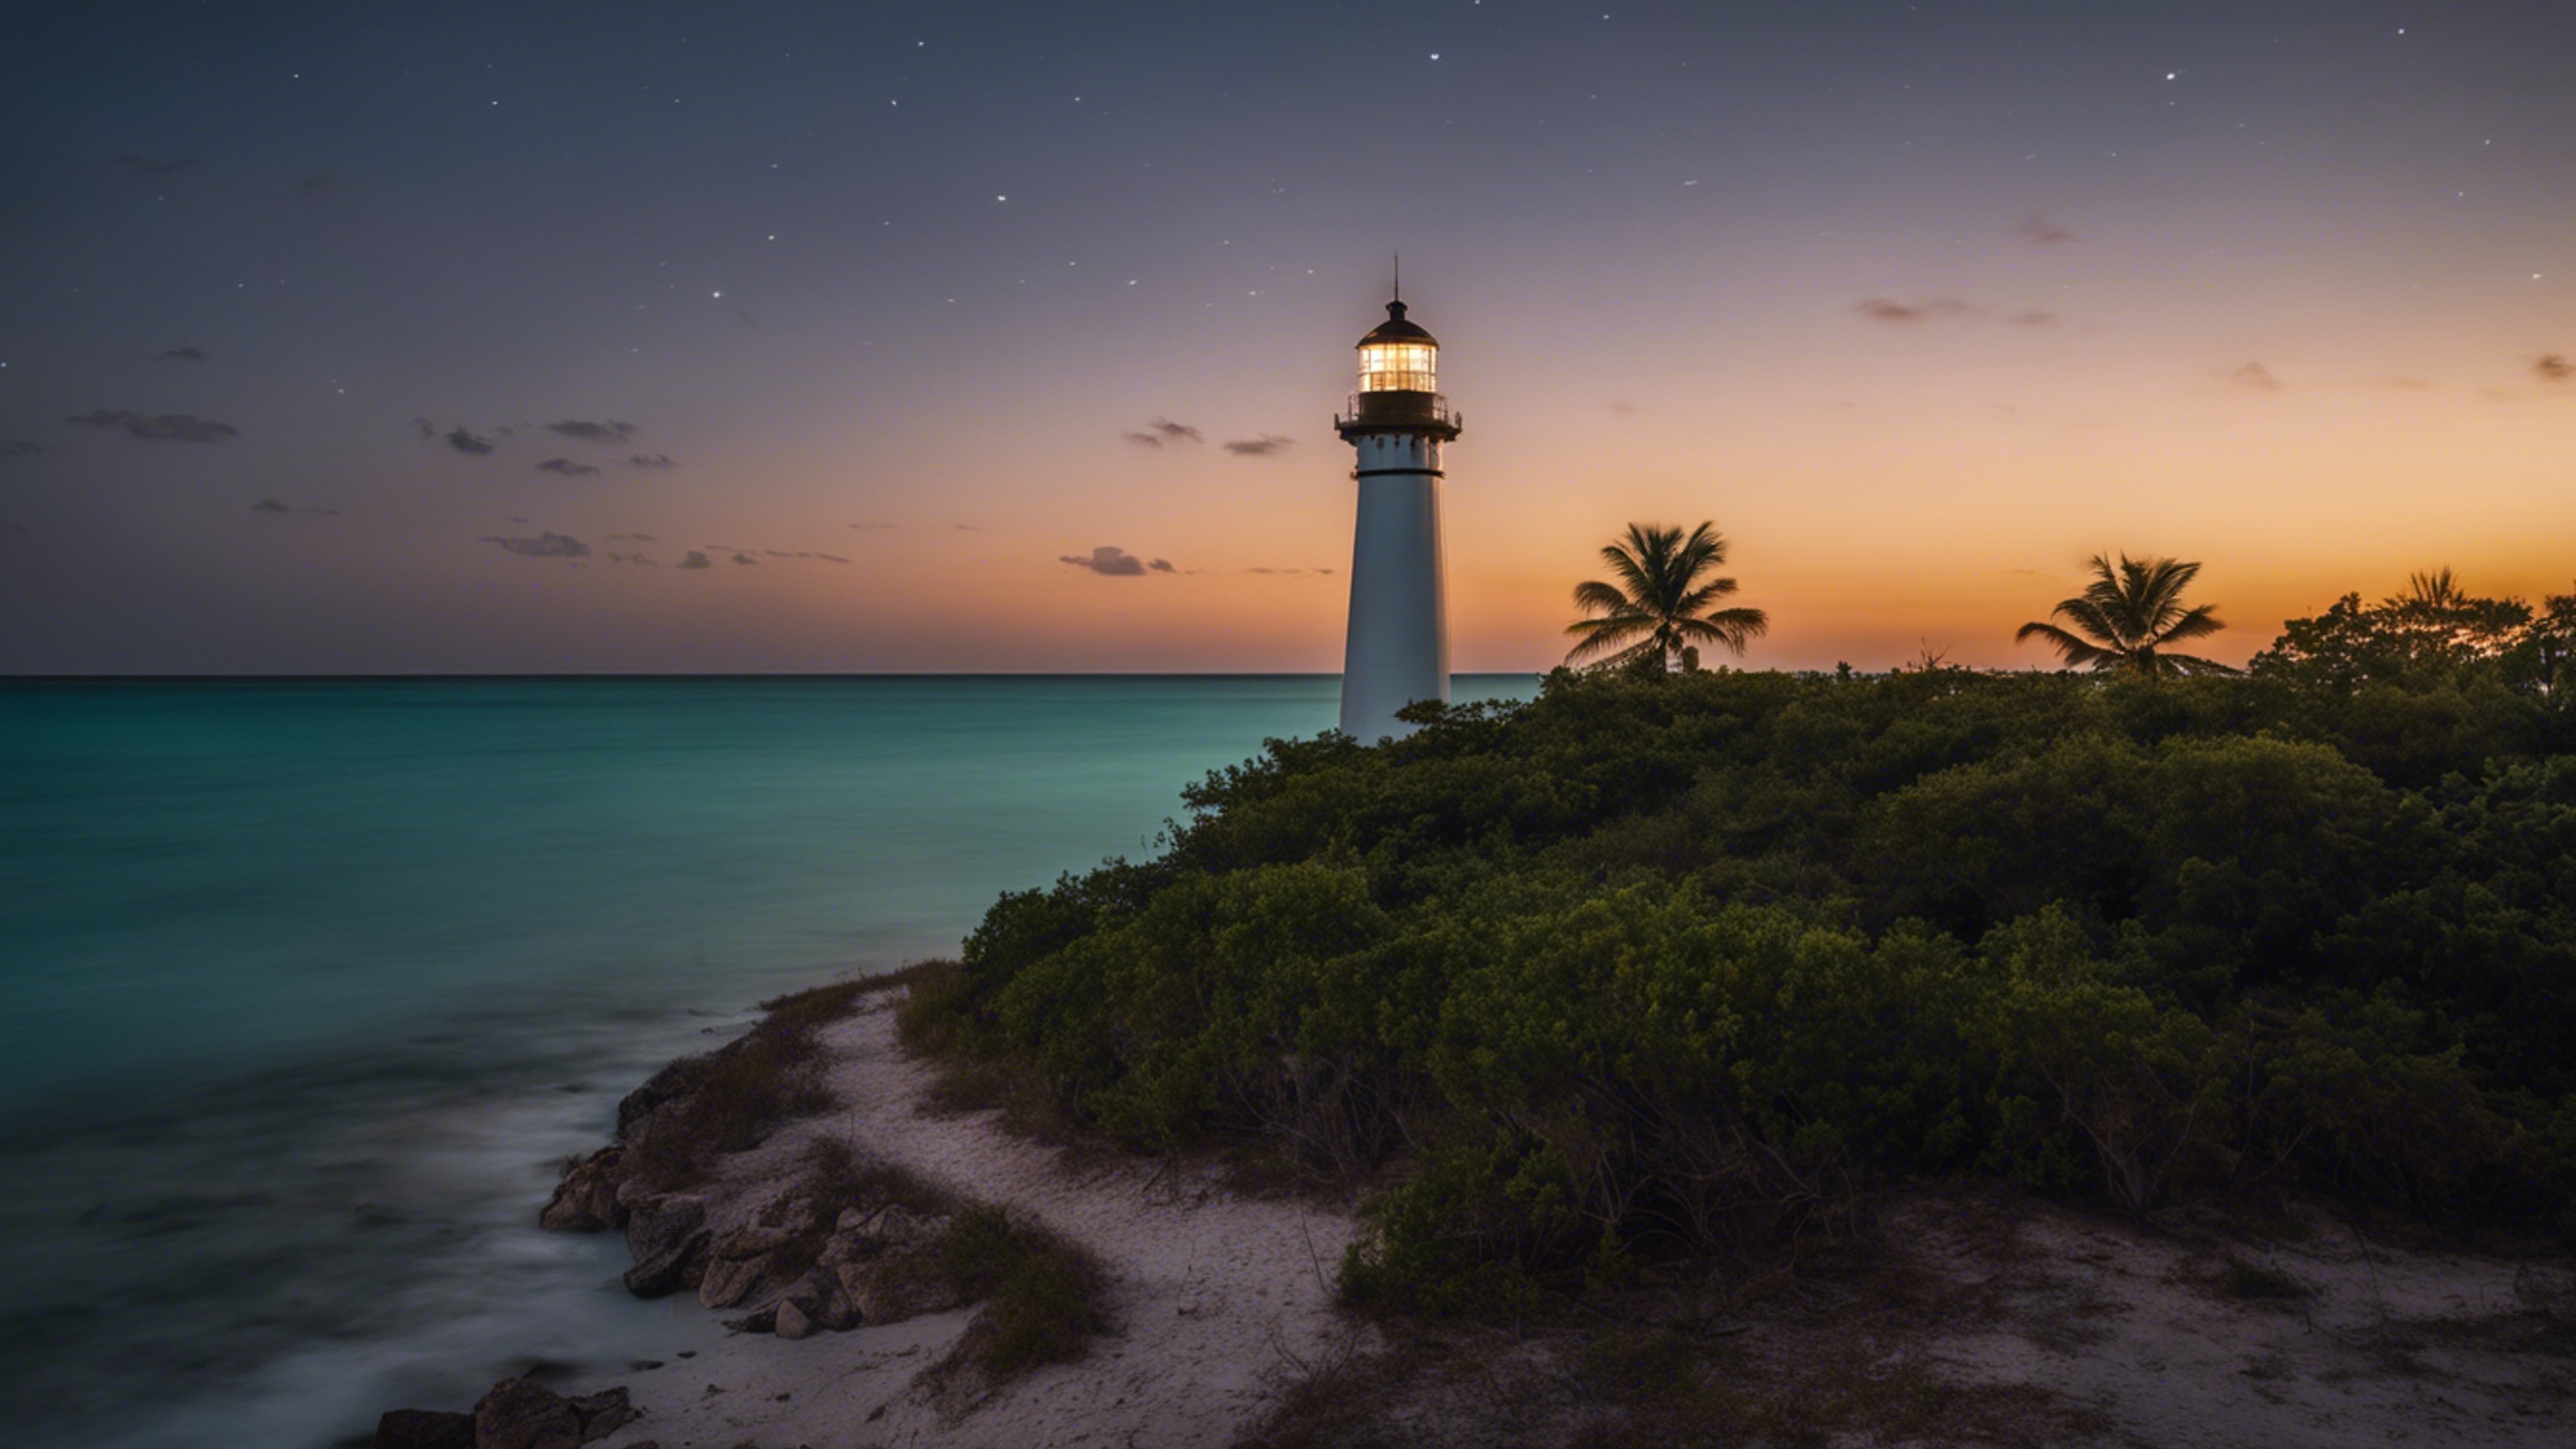 A night shot of an historic lighthouse in Key Biscayne, with the beam of light cutting through the darkness.壁紙[4d5993bb763c4a90b239]